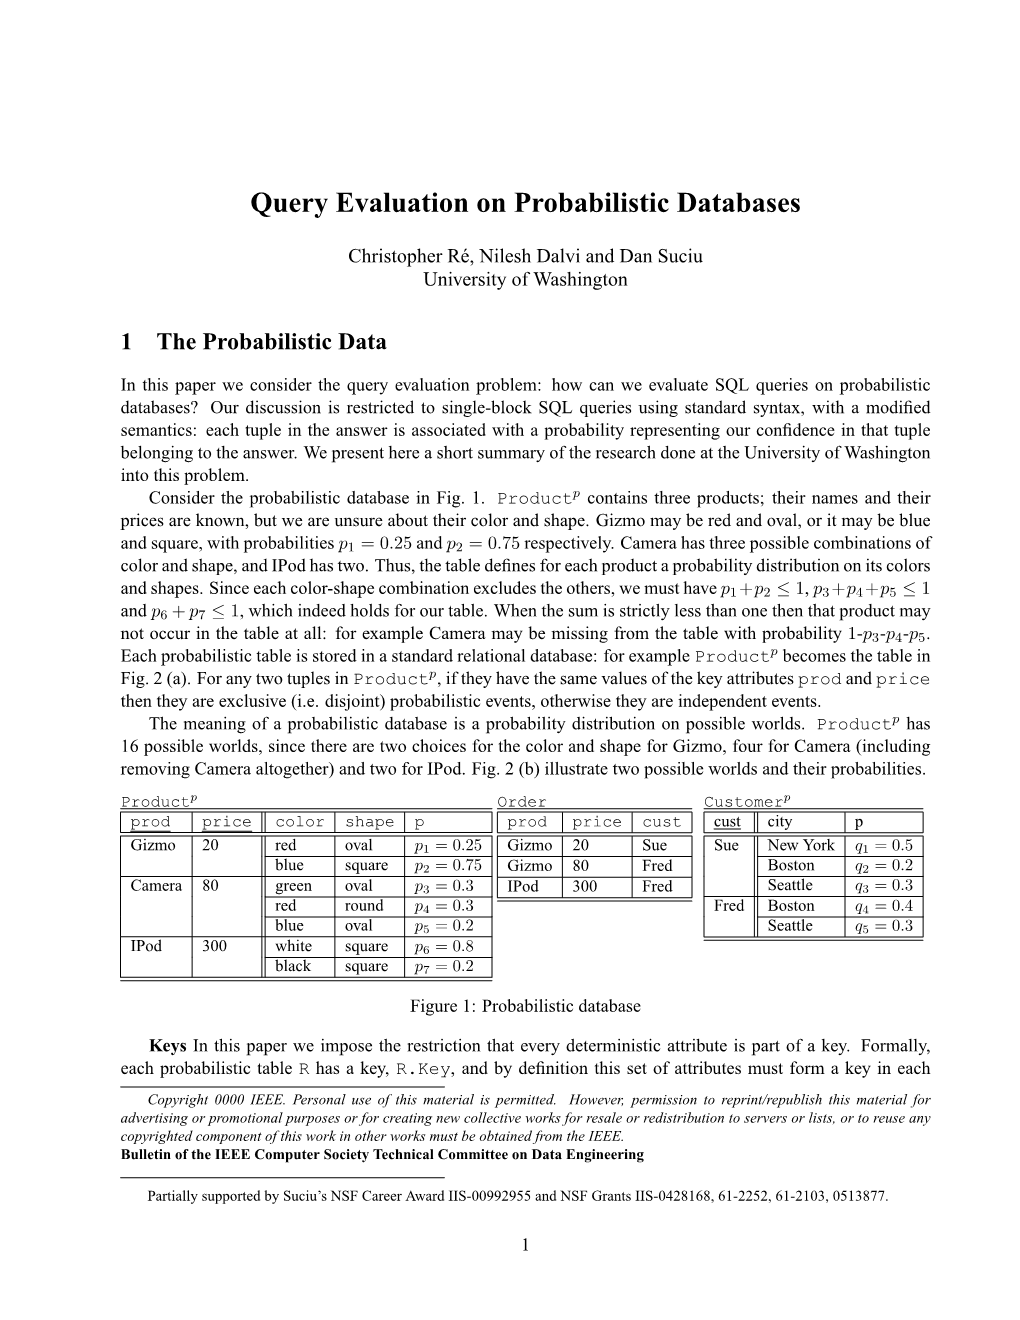 Query Evaluation on Probabilistic Databases